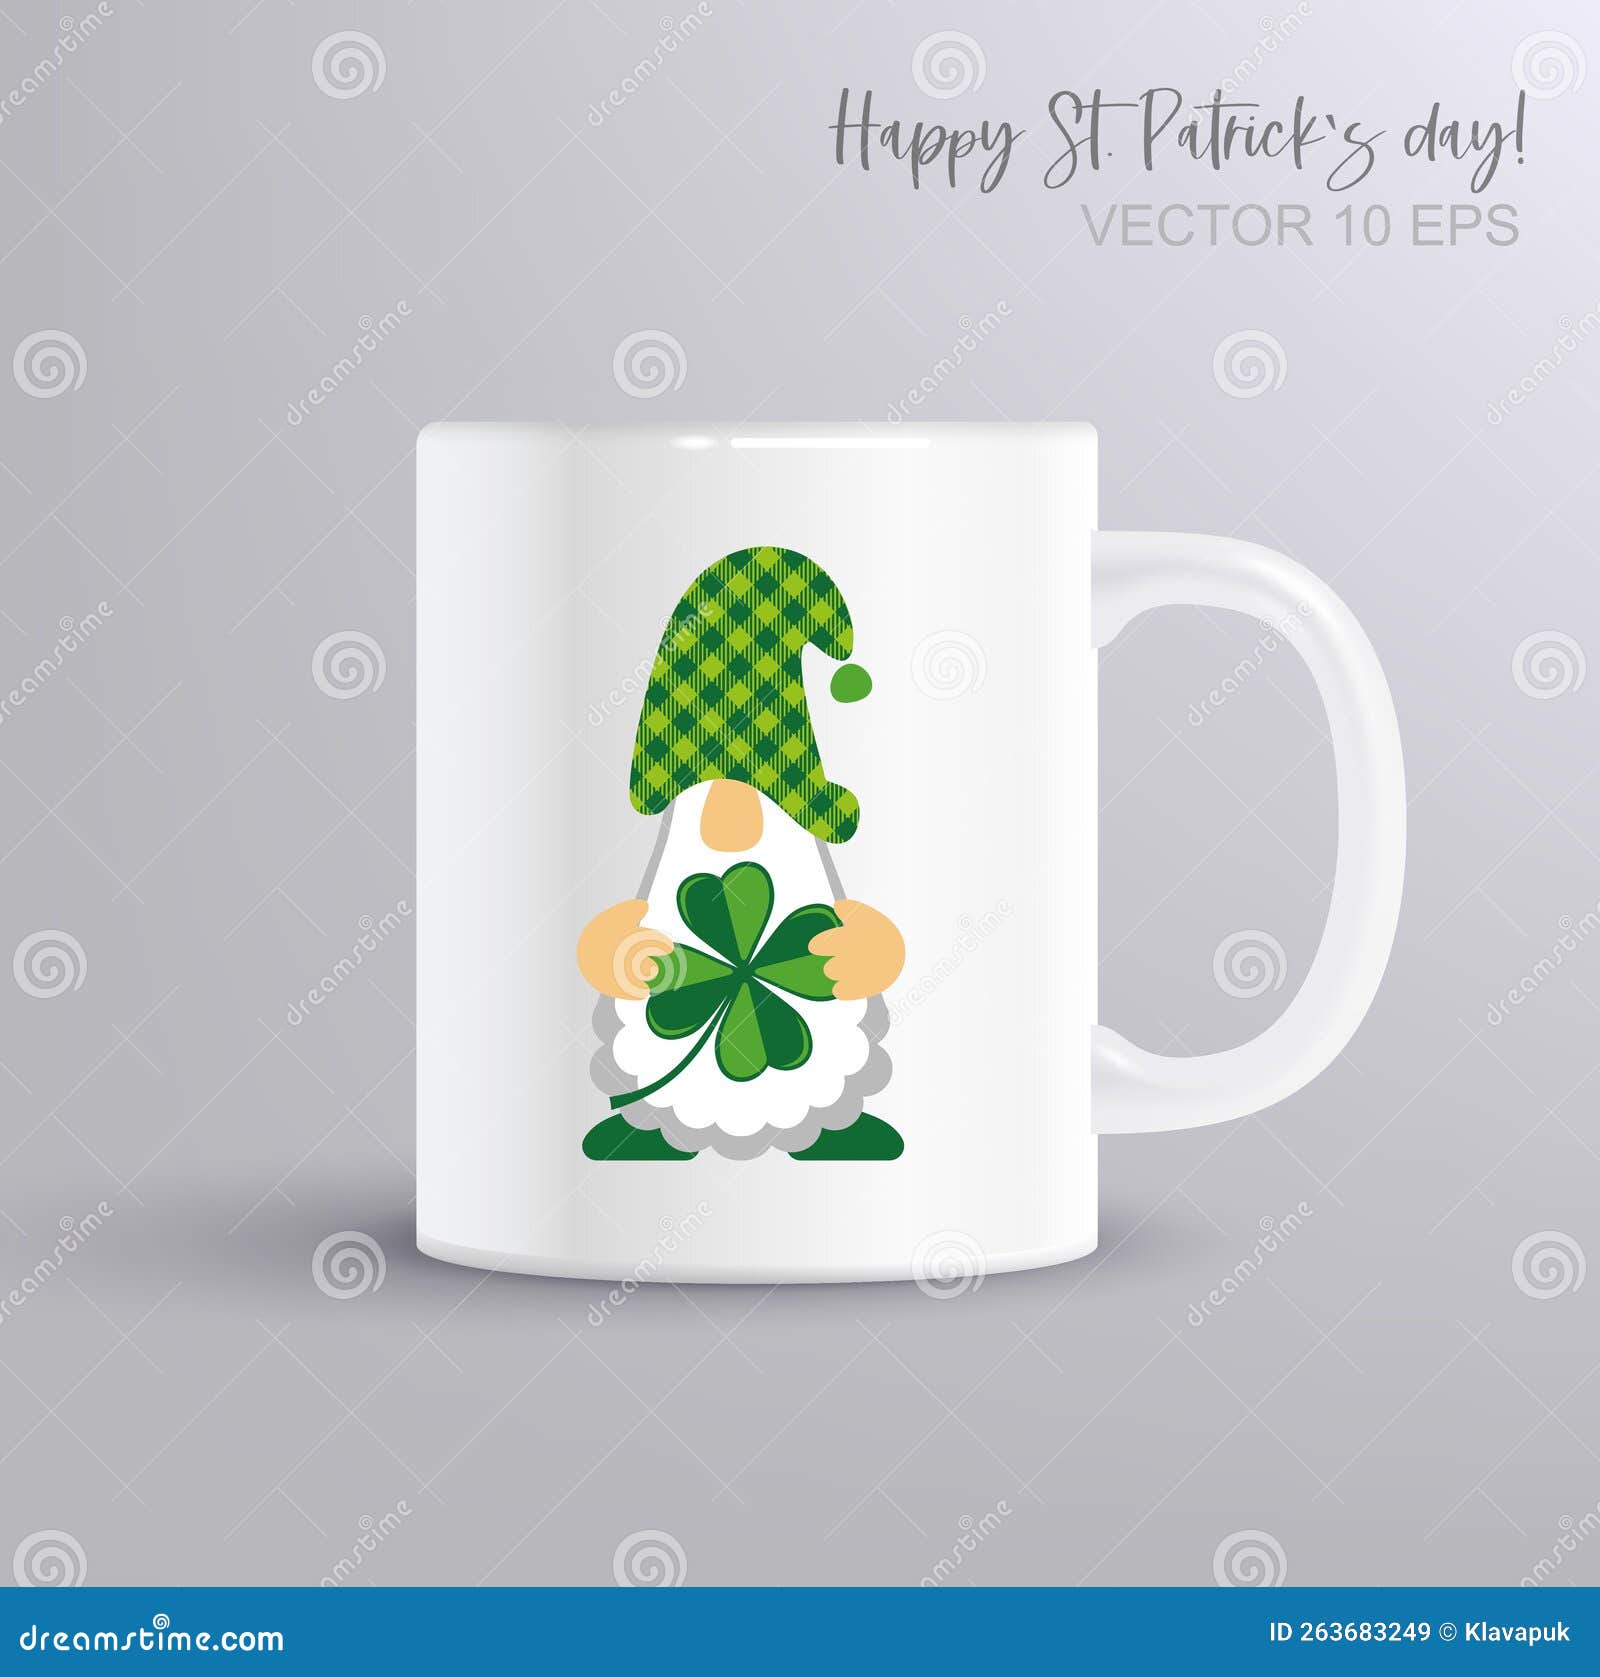 https://thumbs.dreamstime.com/z/happy-st-patrick-s-day-gnome-leafs-clover-illustration-coffee-mug-mockup-holds-263683249.jpg